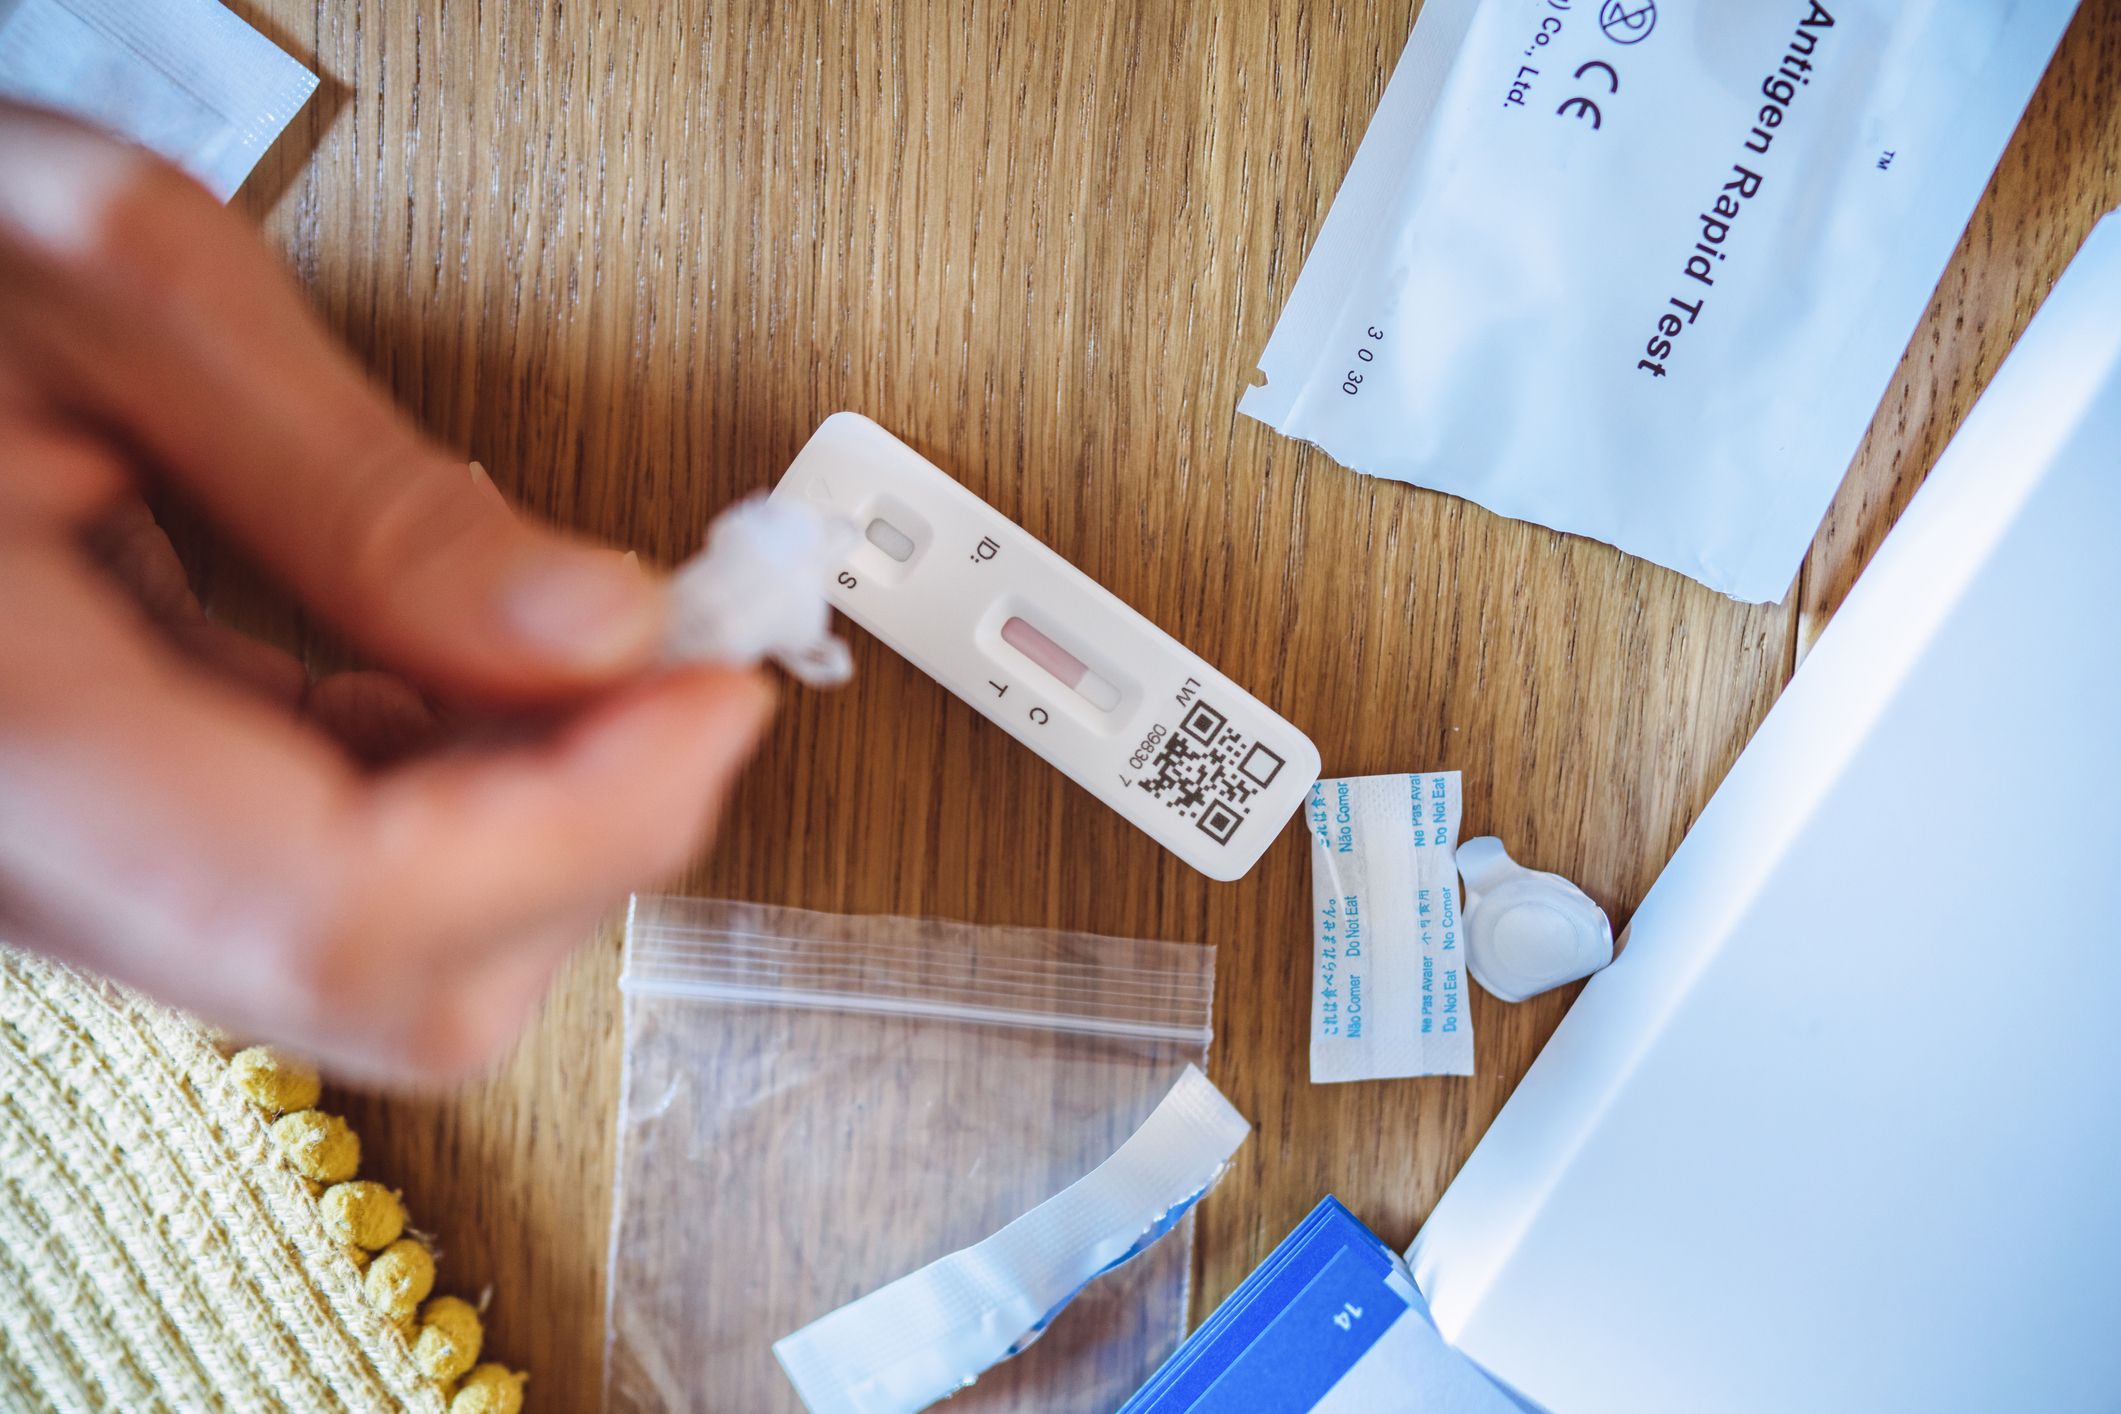 Do Expired COVID Tests Work? Read This Before You Toss Them